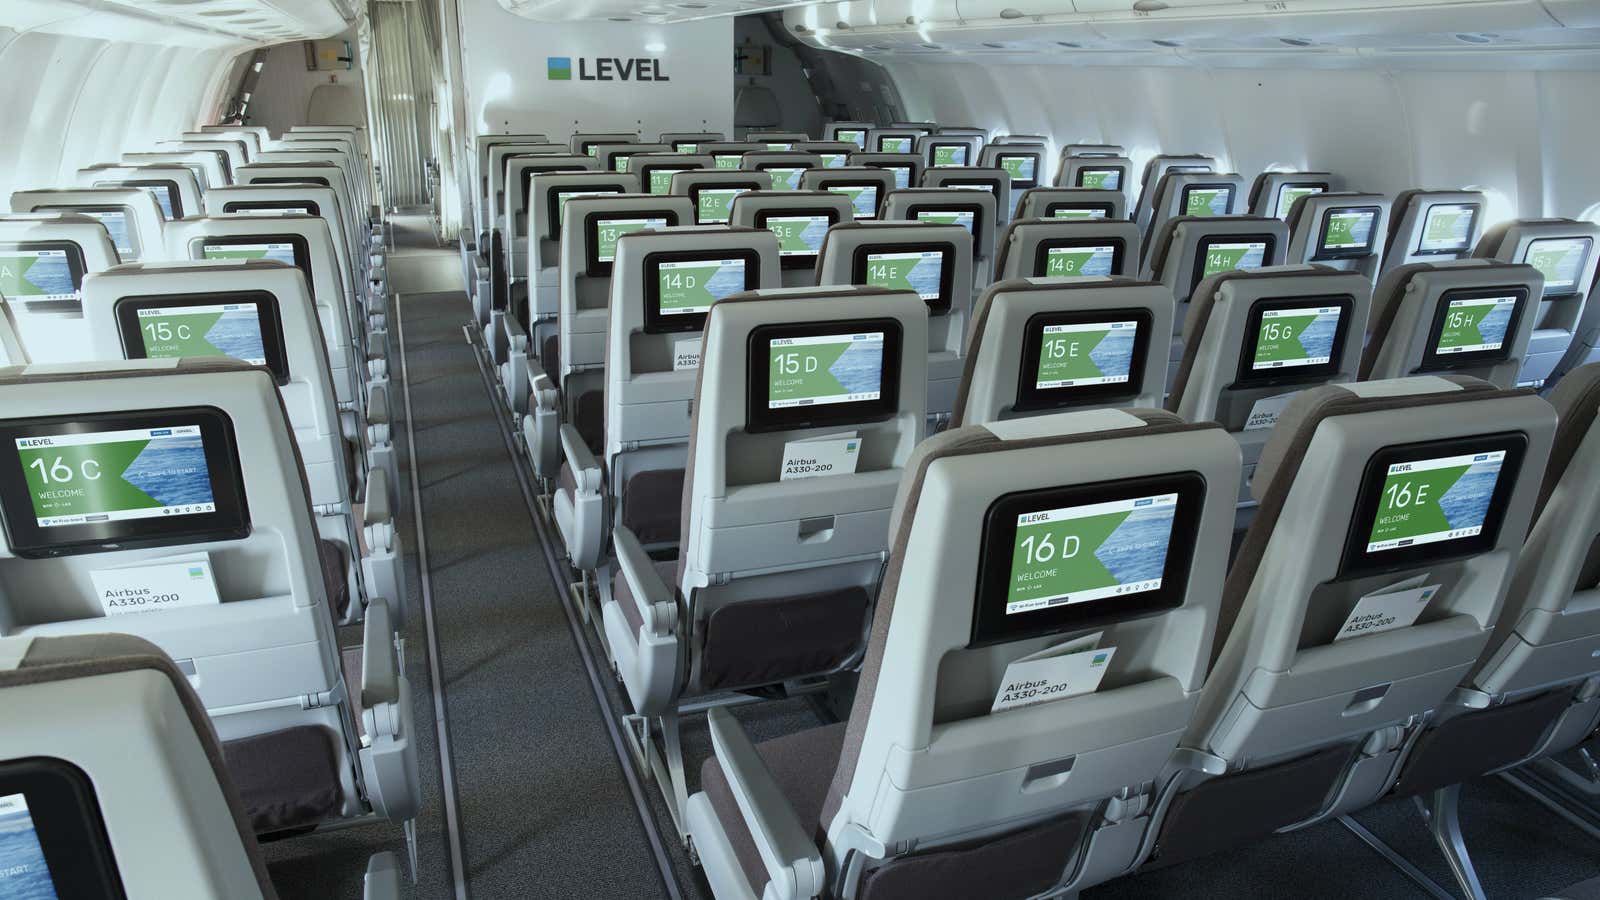 Who needs legroom when you have low prices?